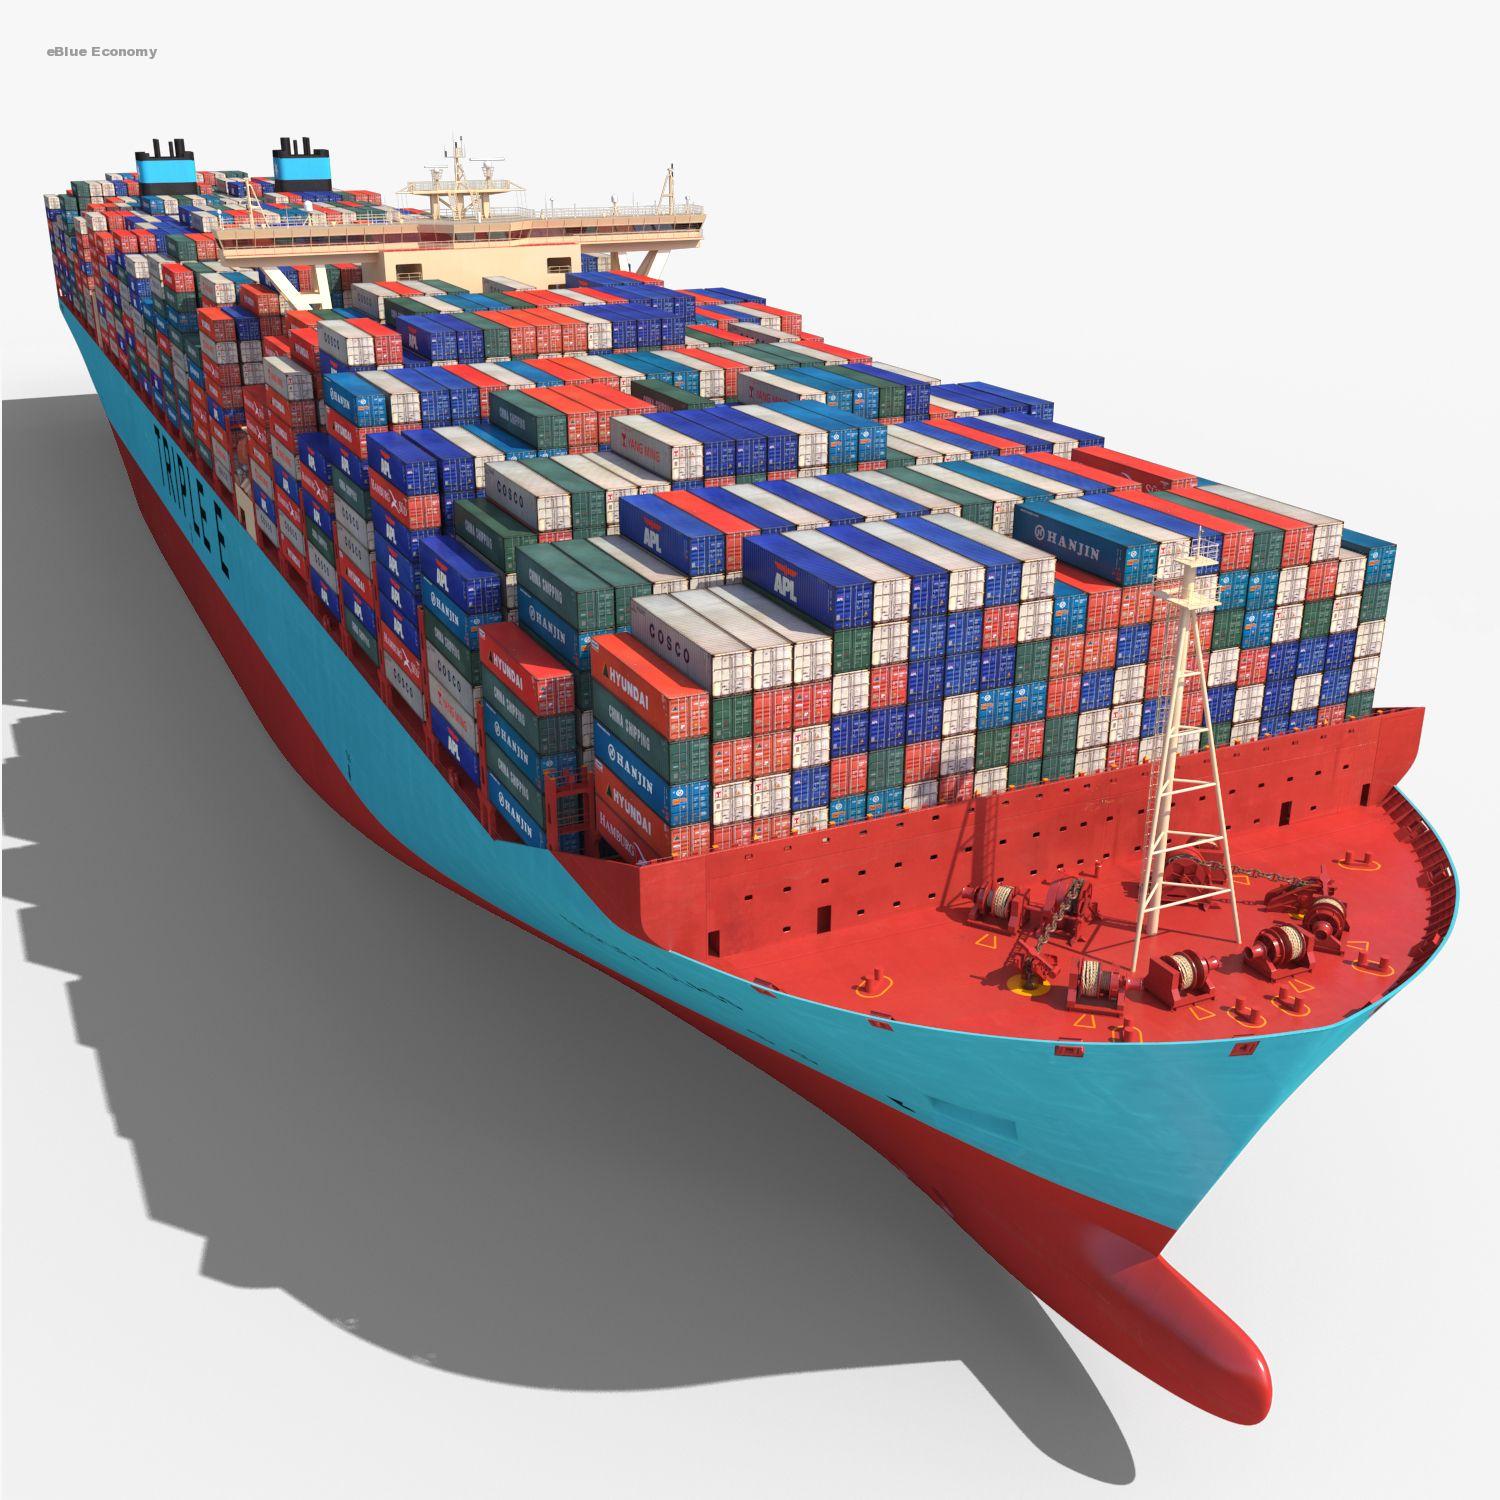 eBlue_economy_Classifications _ Maritime Register of Shipping